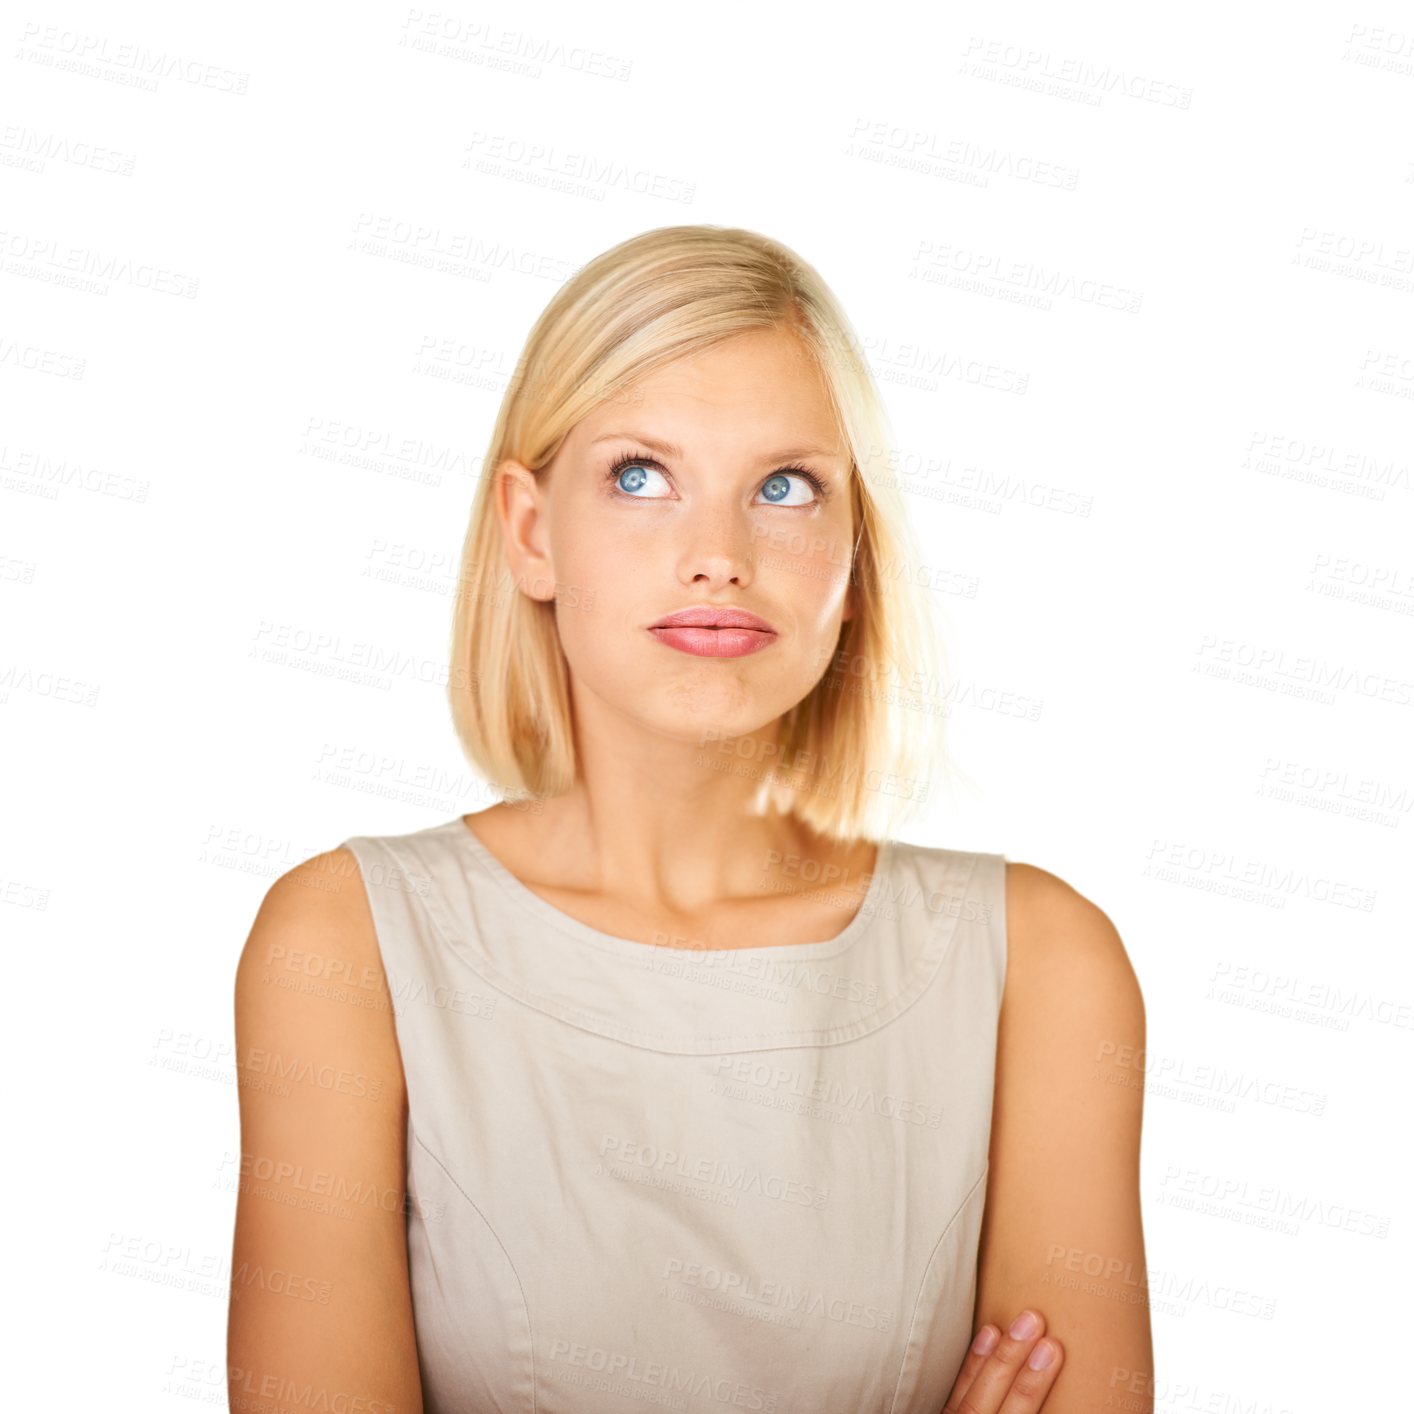 Buy stock photo Woman, doubt and model thinking of anxiety on transparent background while worried and nervous. Business person, face or headshot to think of solution, decision or choice and question isolated on png